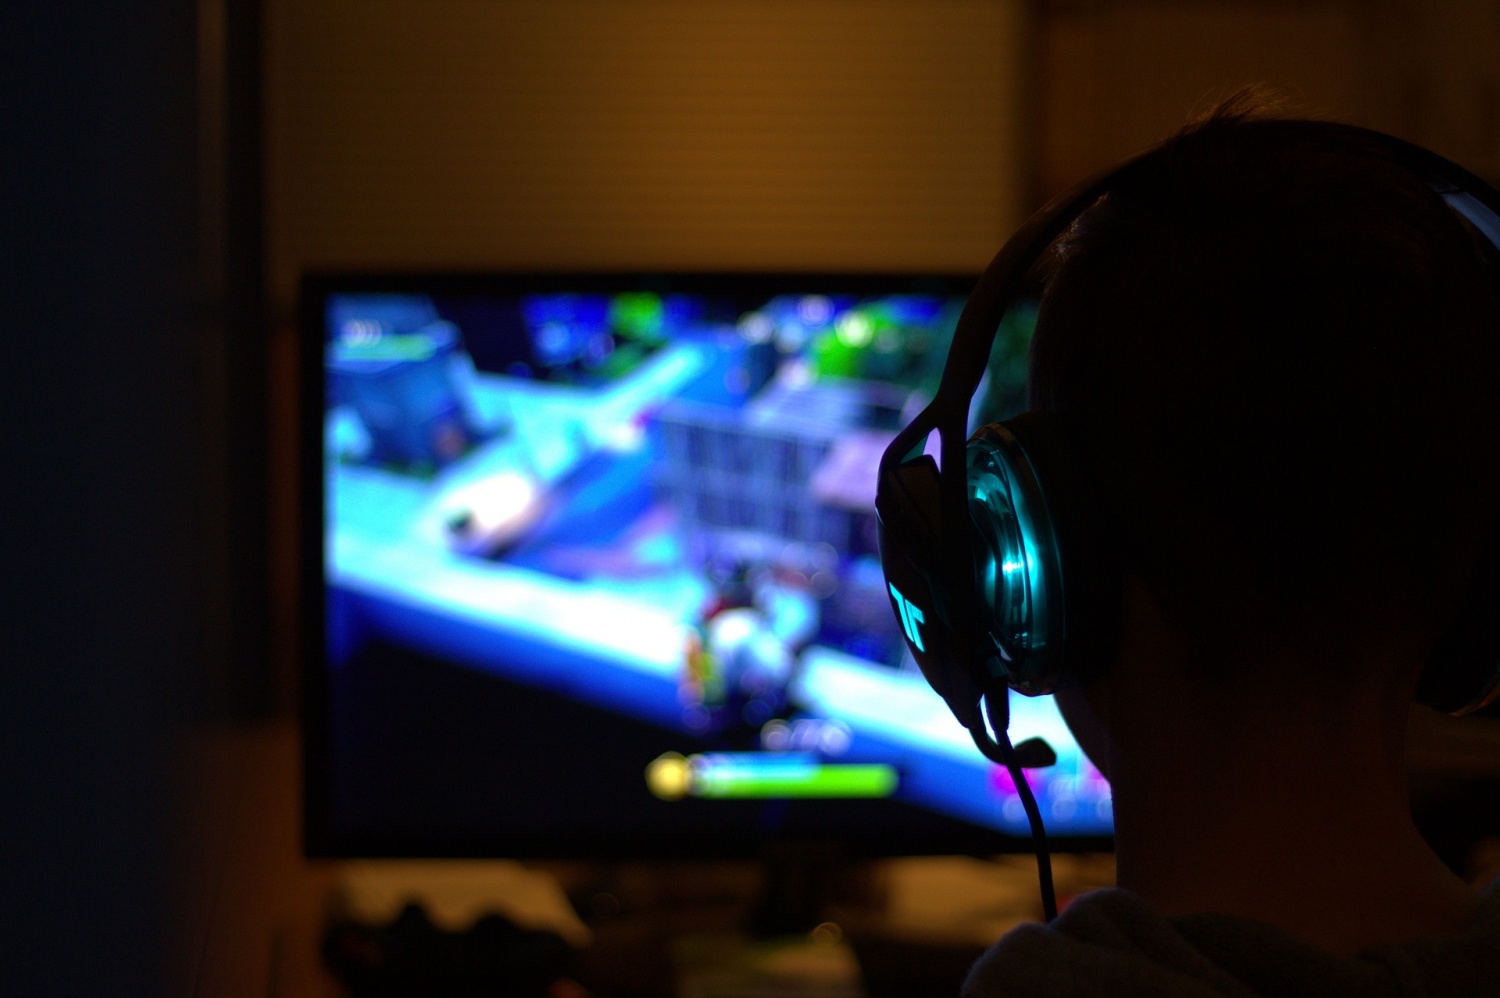 Italians on Lockdown are Playing More Online Games Like Fortnite to Pass the Time